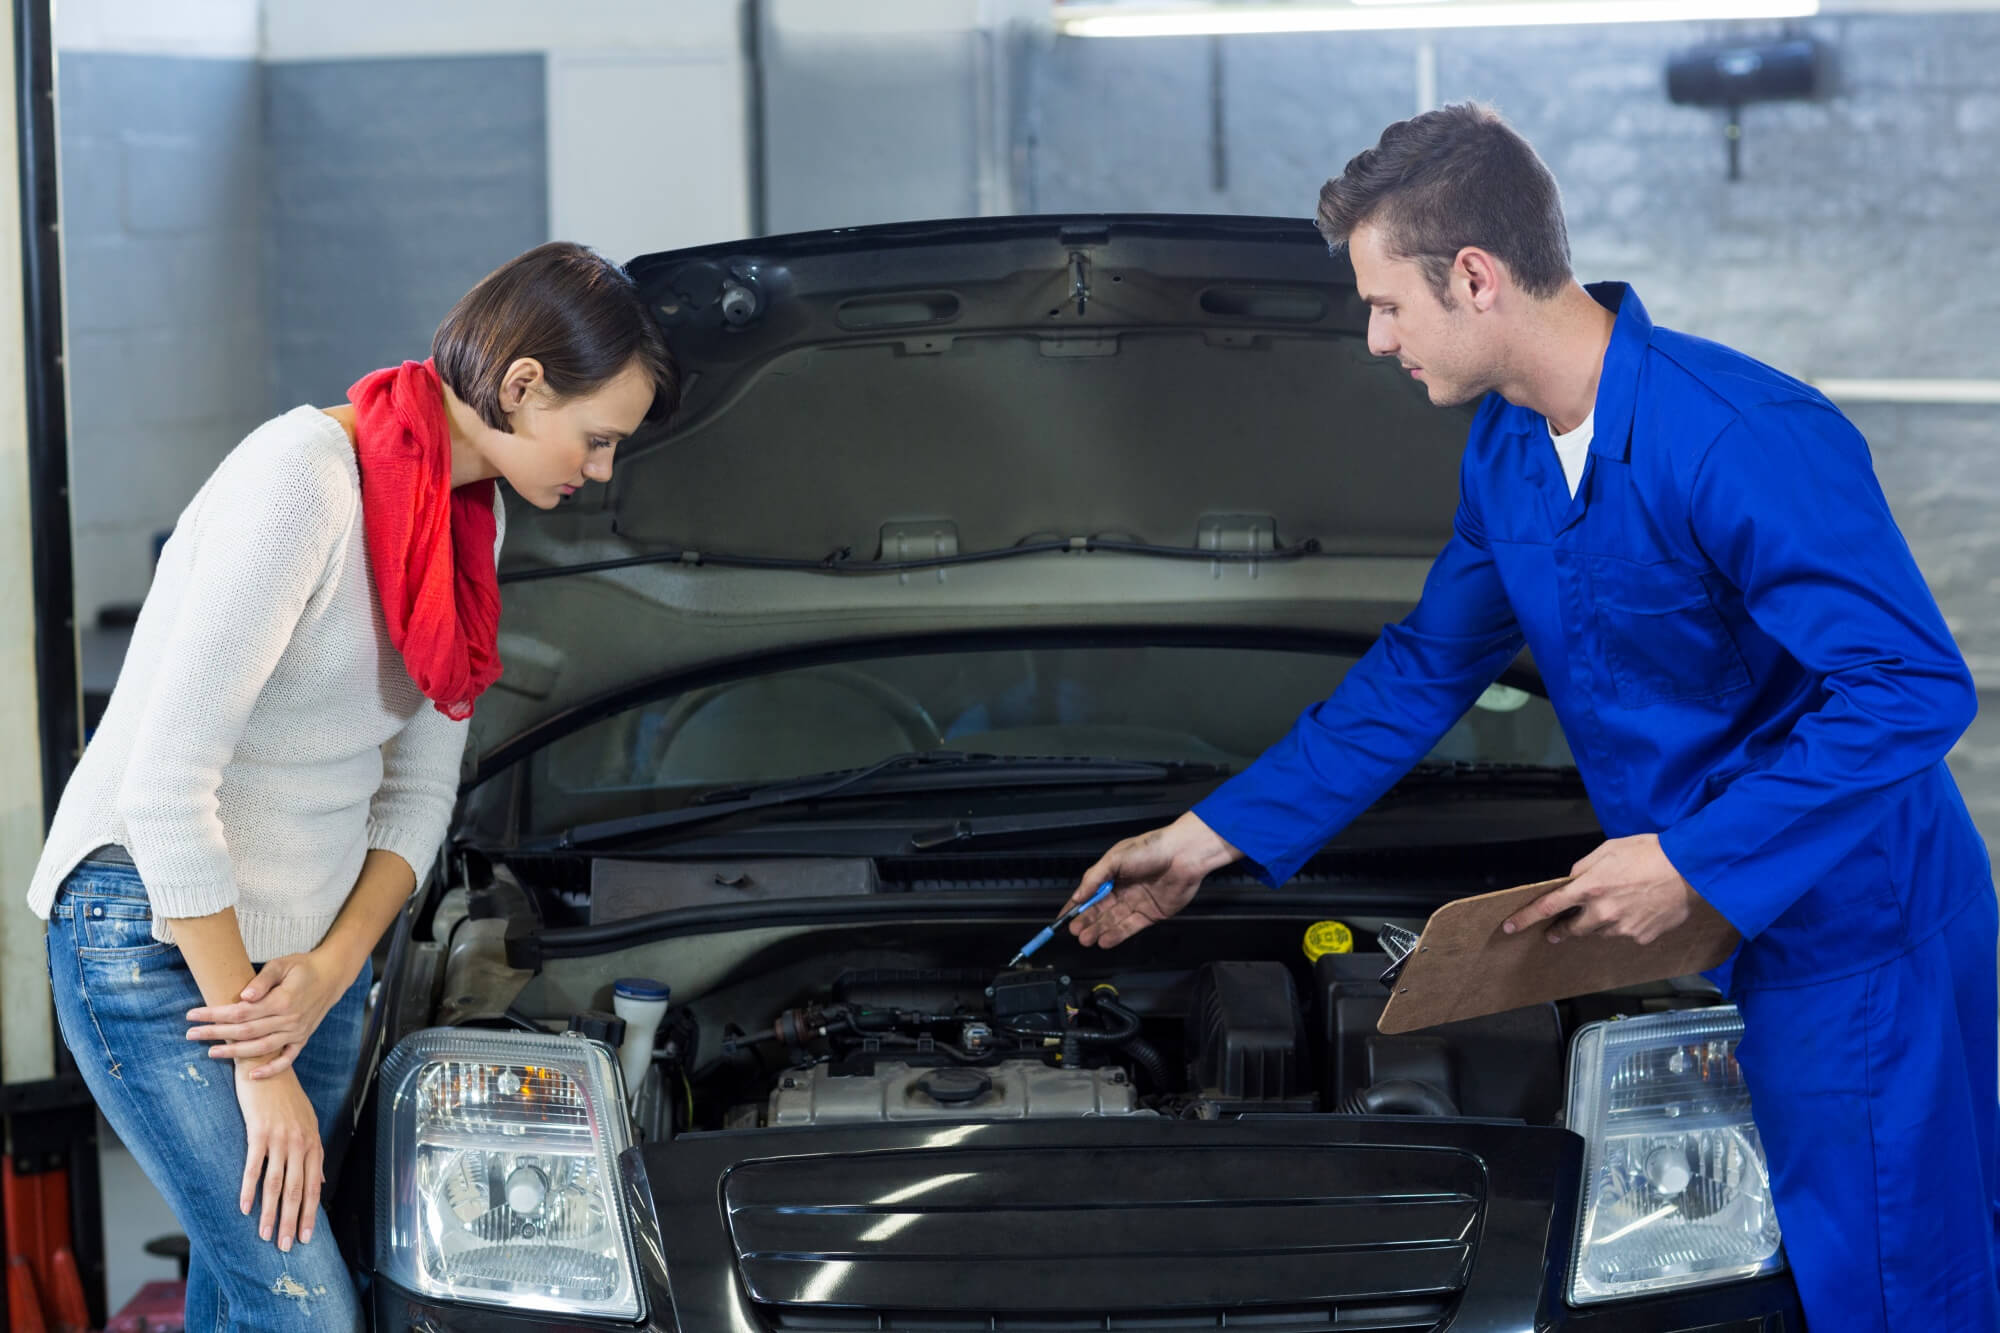 mechanic-showing-customer-problem-with-car